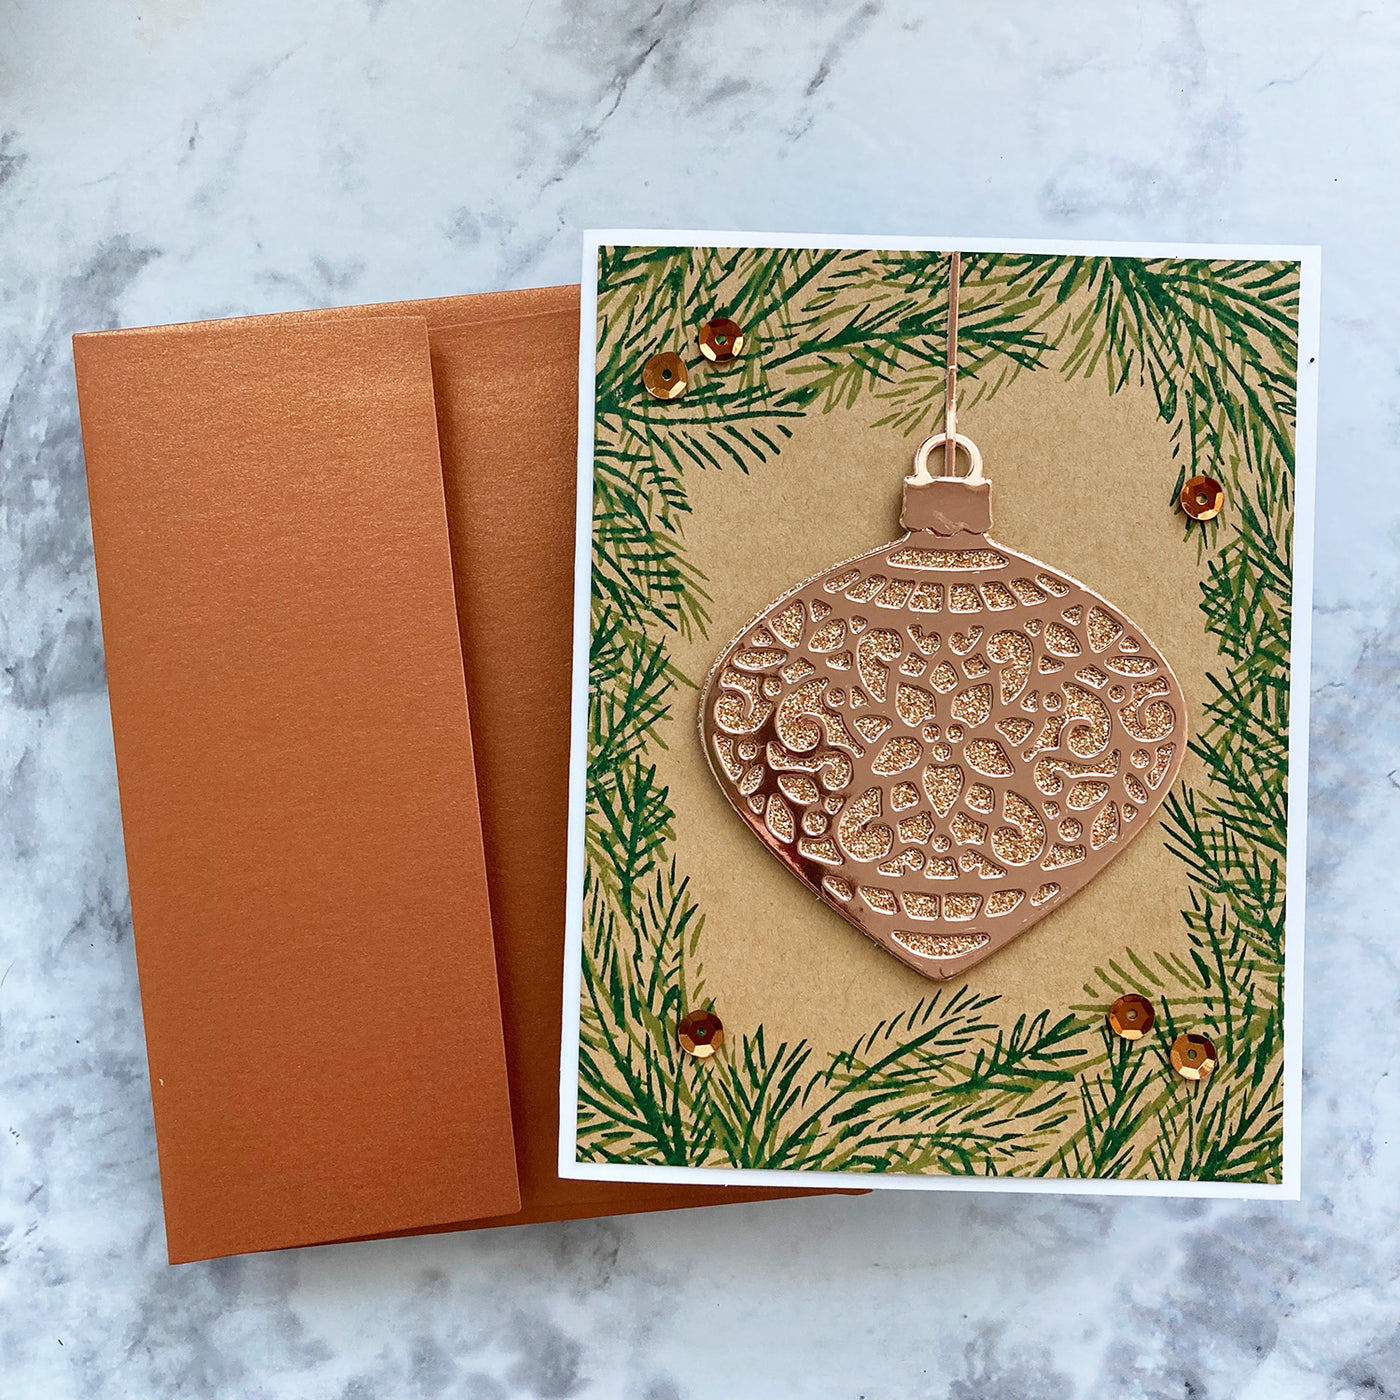 Handmade Christmas card featuring Rose Gold Foil Cardstock